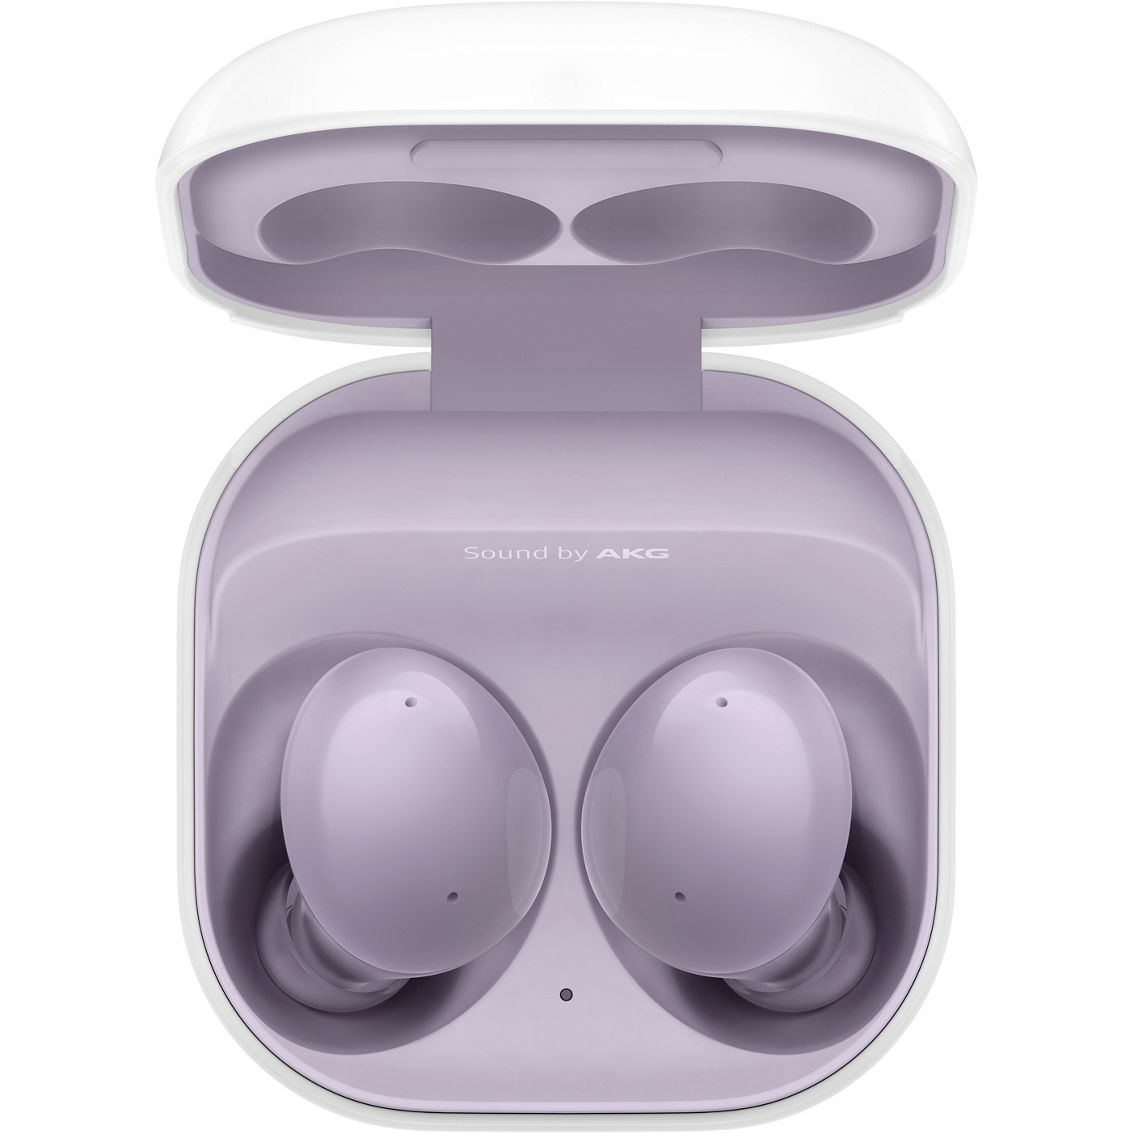 Samsung Buds2 Wireless Earbuds - Image 3 of 3